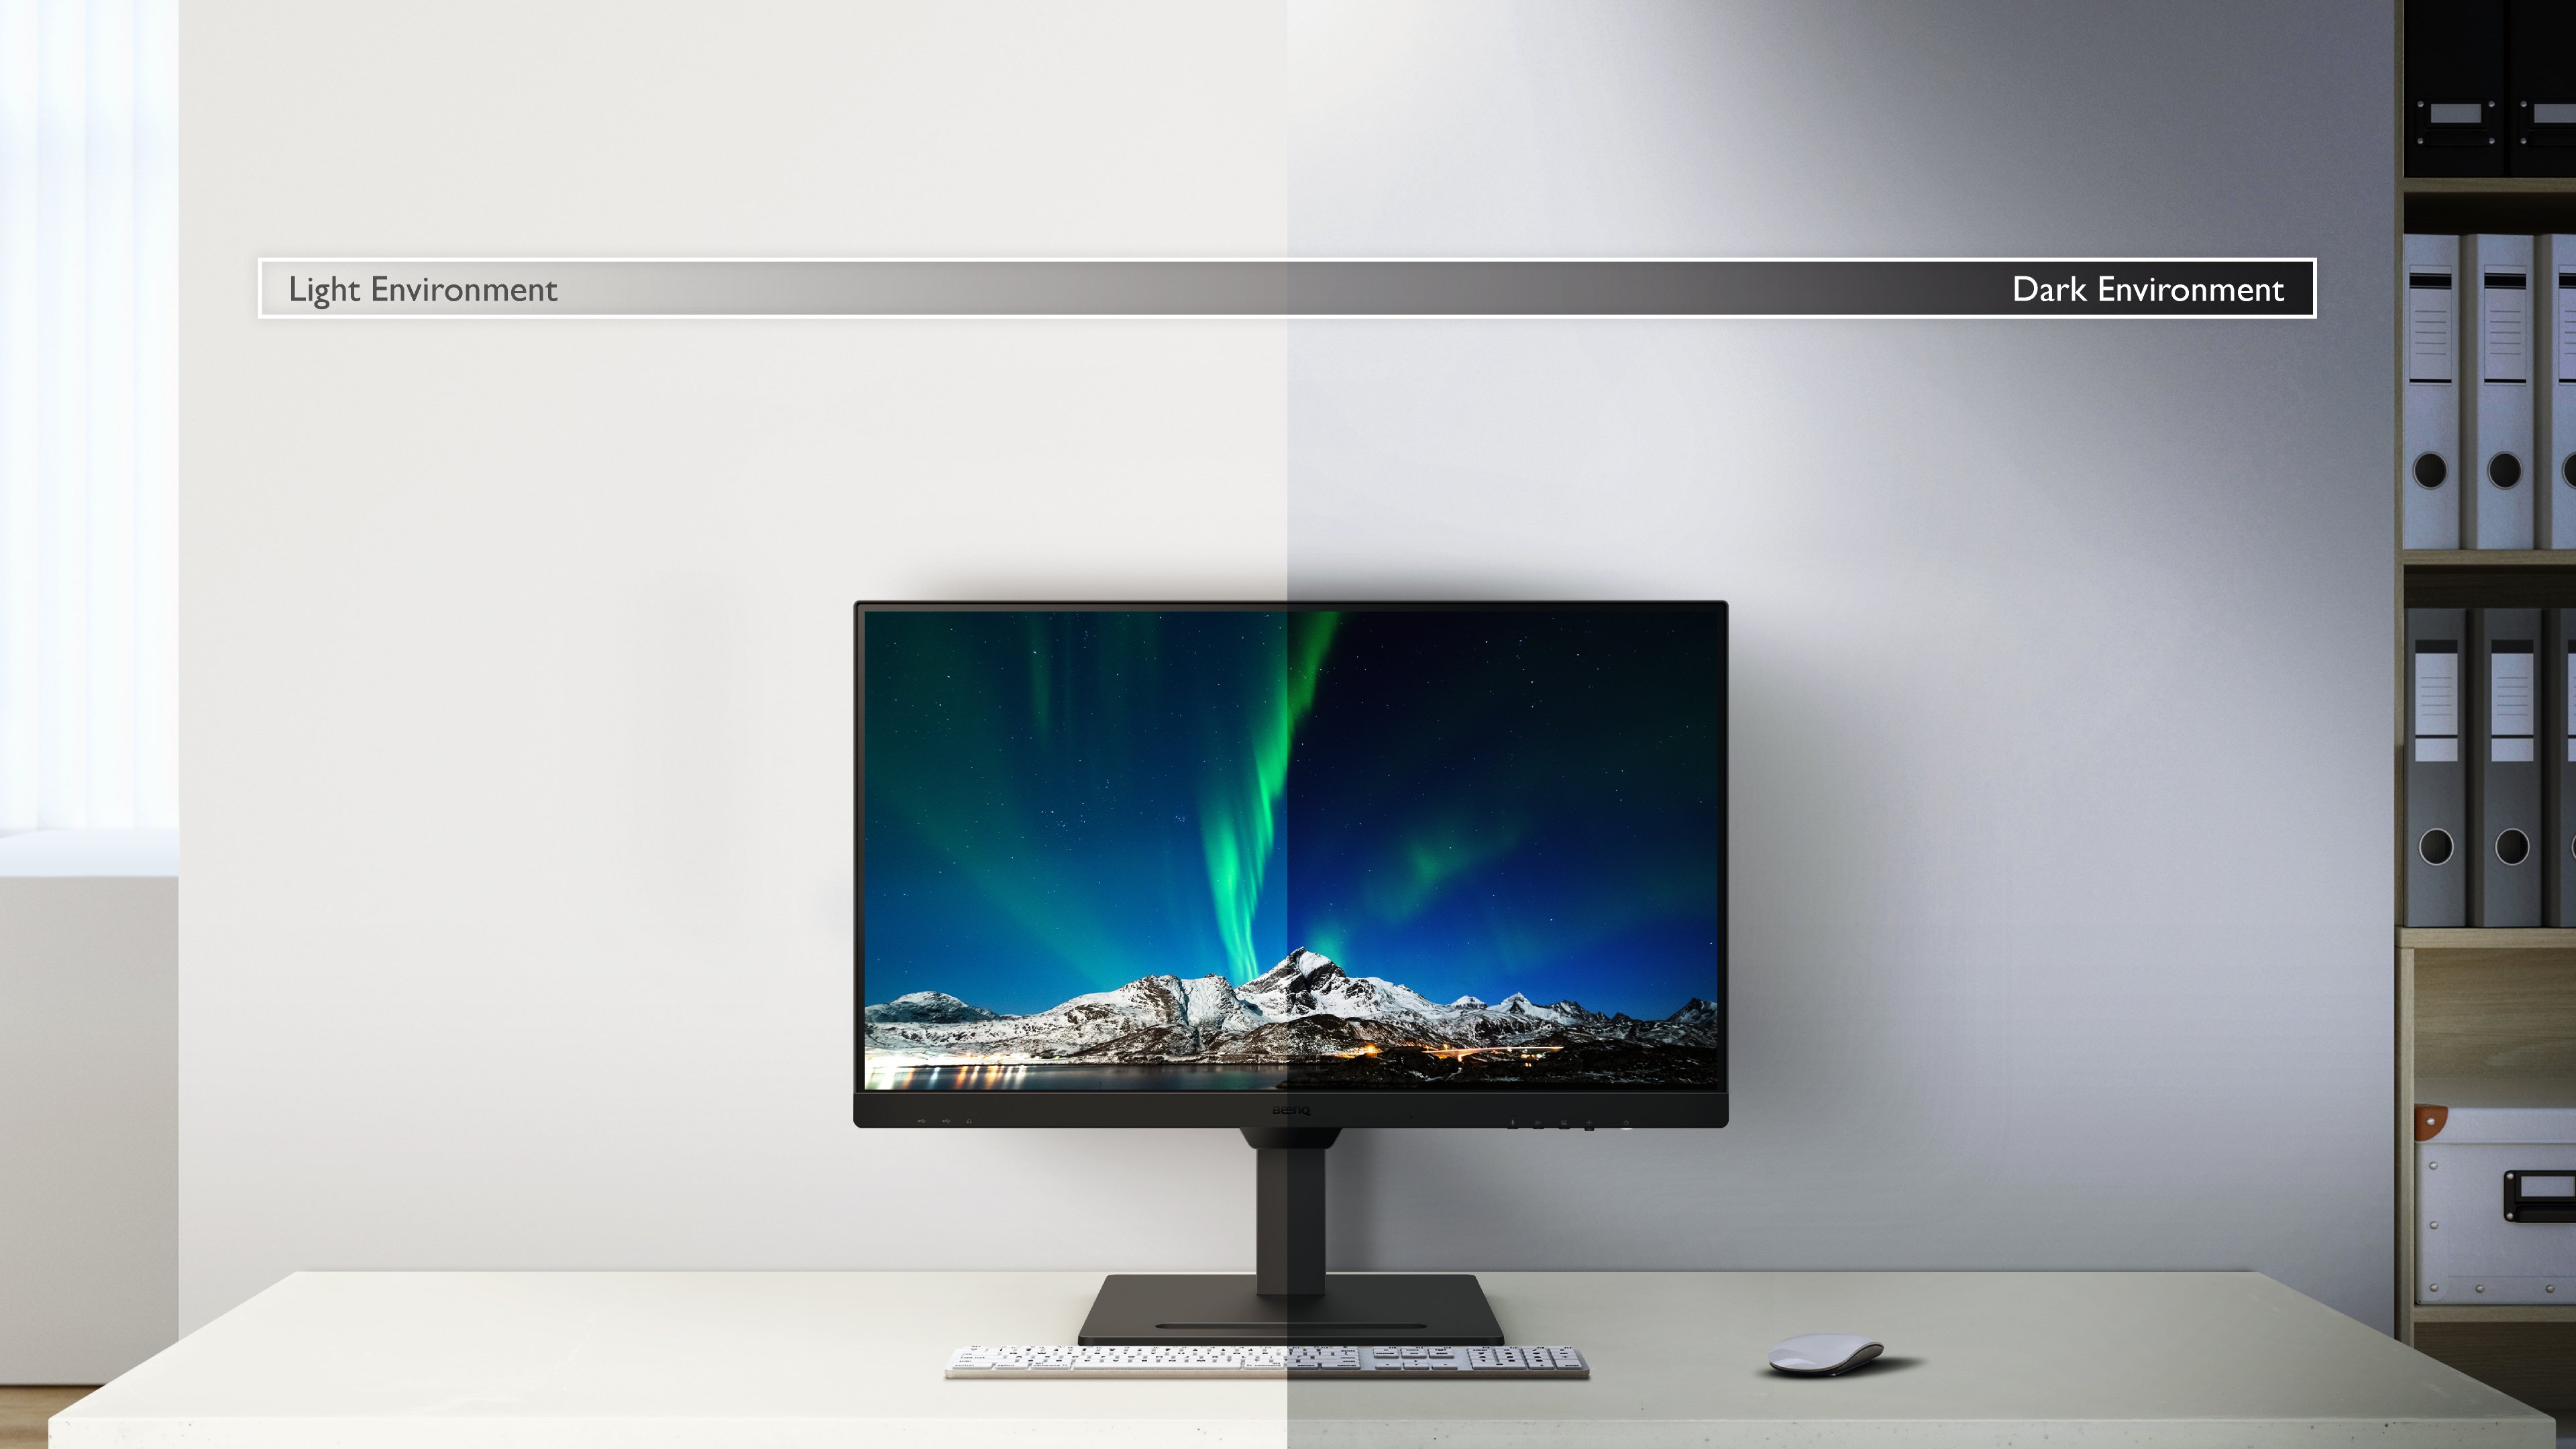 BenQ BL2790QT Brightness Intelligence actively adjusts screen brightness for comfortable viewing experiences and Brightness Intellignece Gen.2 allows customizable brightness.